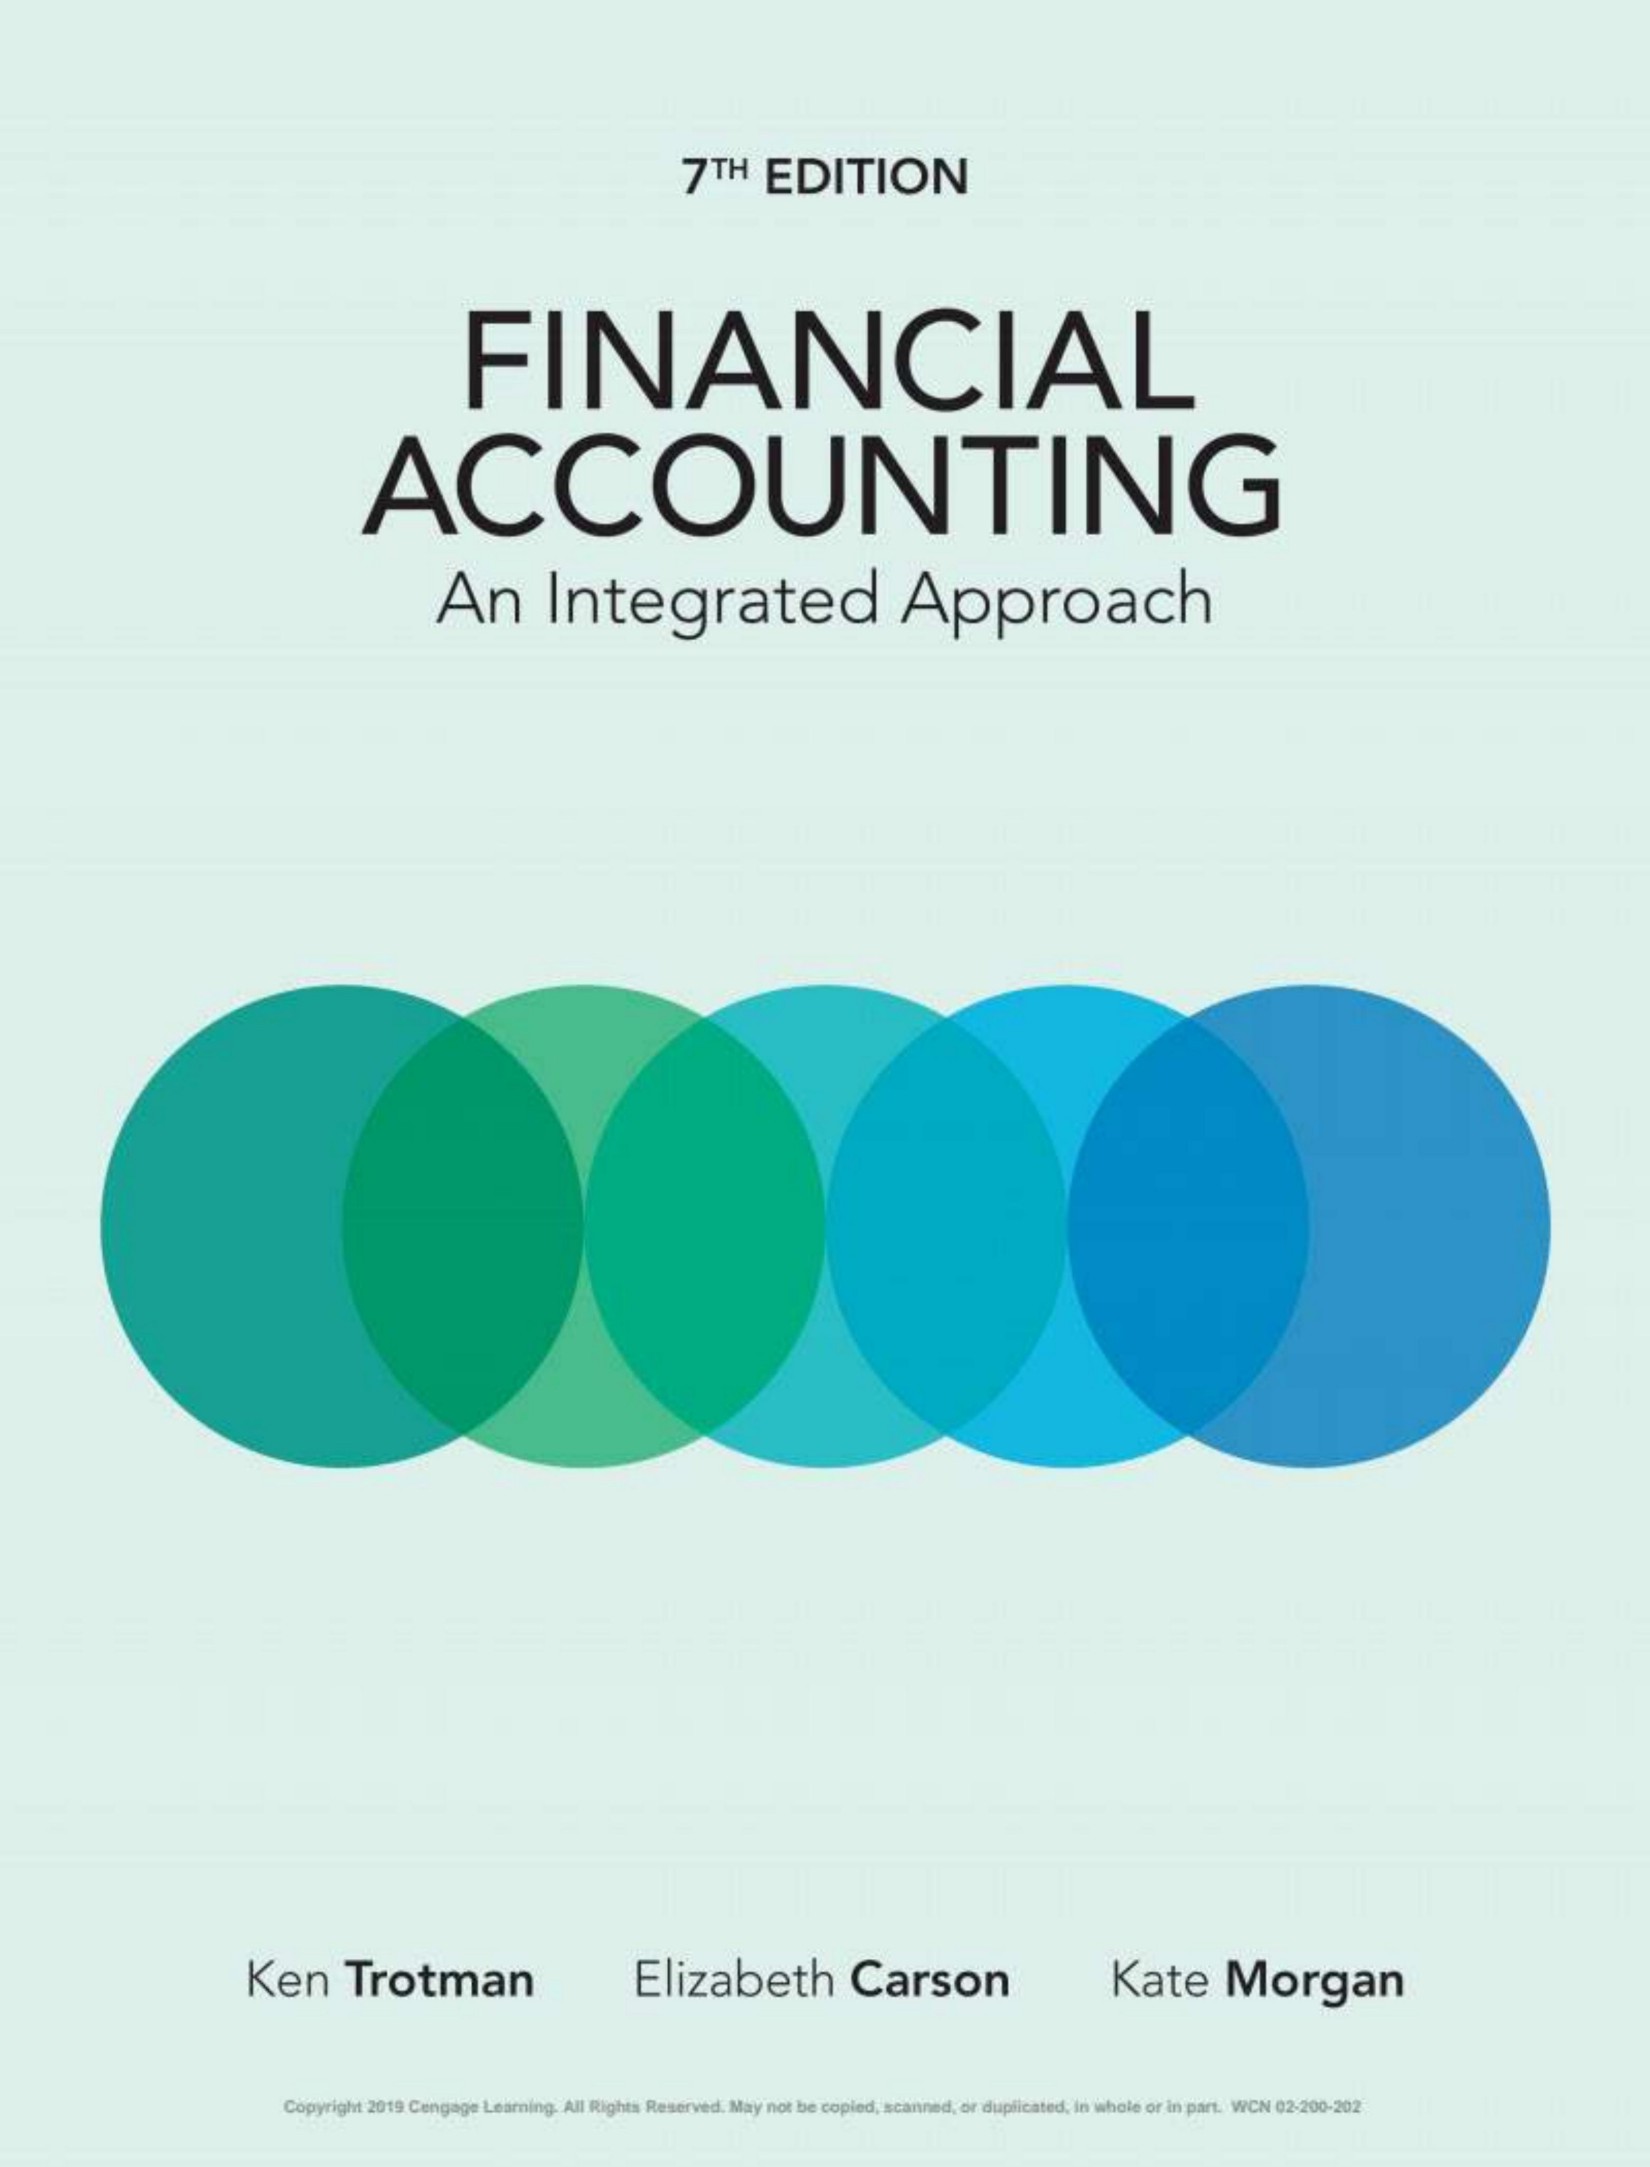 Financial accounting an integrated approach 7th edition.jpg